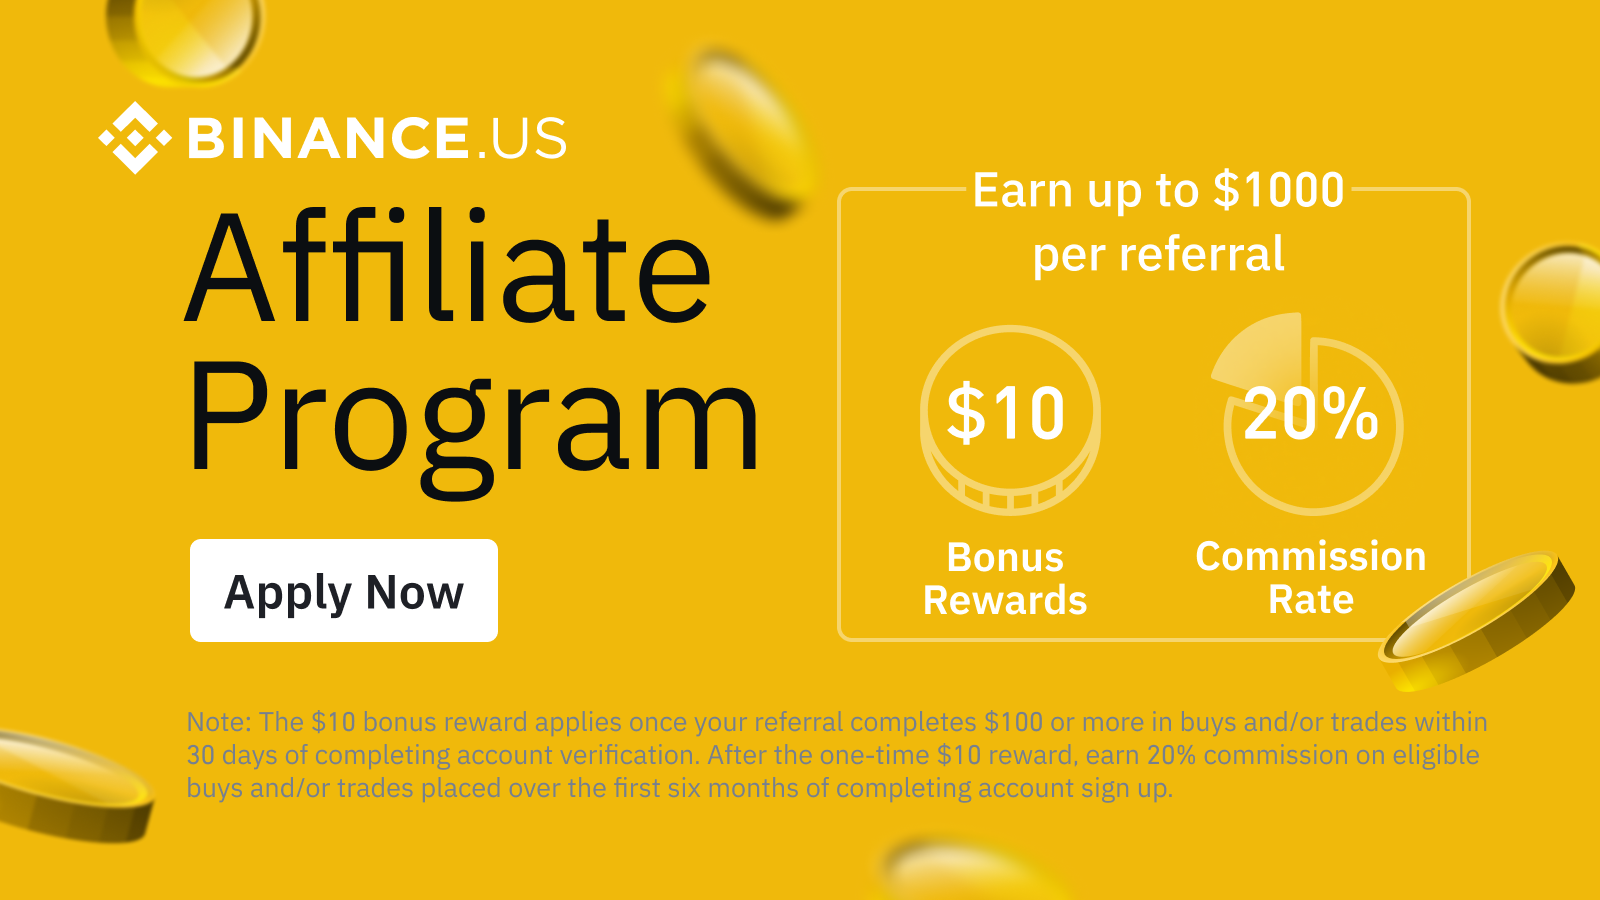 Introducing the Binance.US Affiliate Program | Apply Now